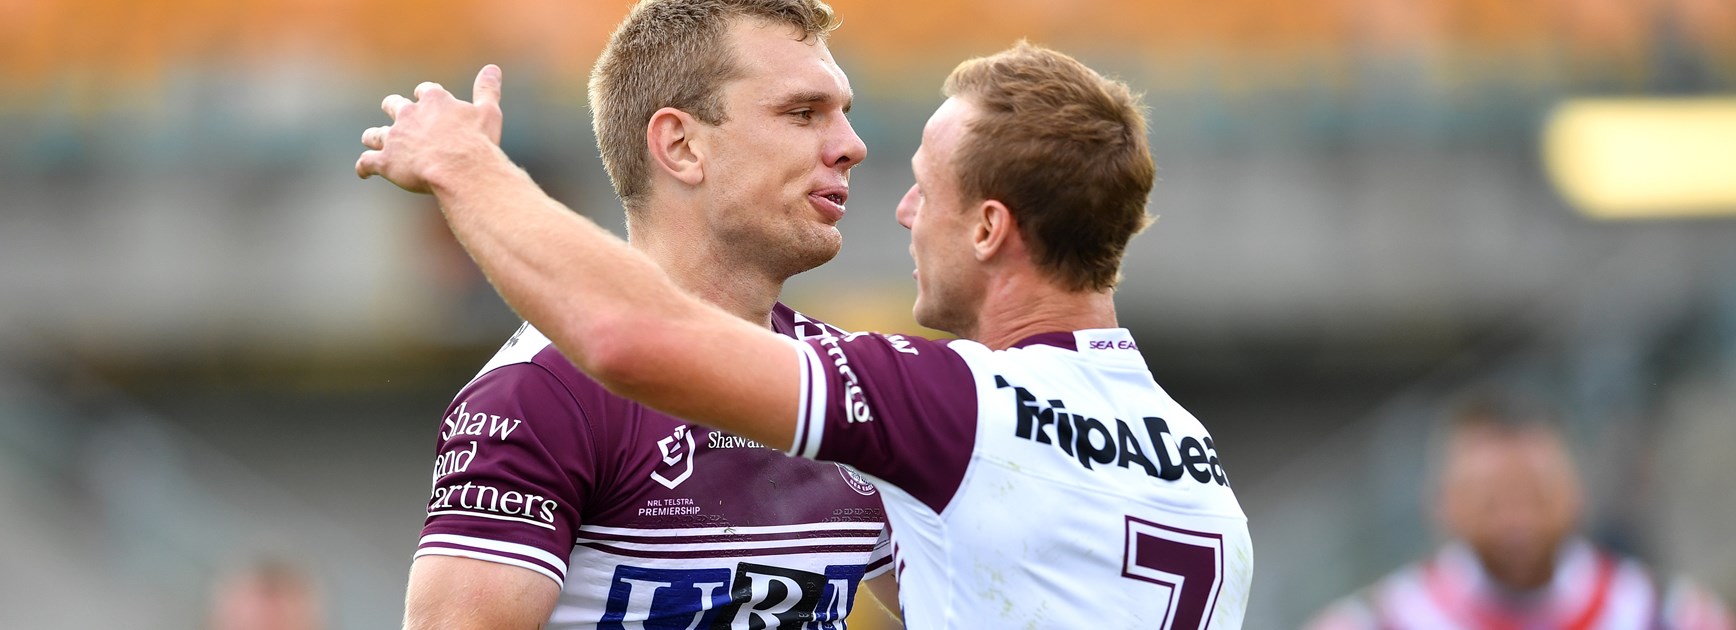 Sea Eagles record gallant win over Sydney Roosters